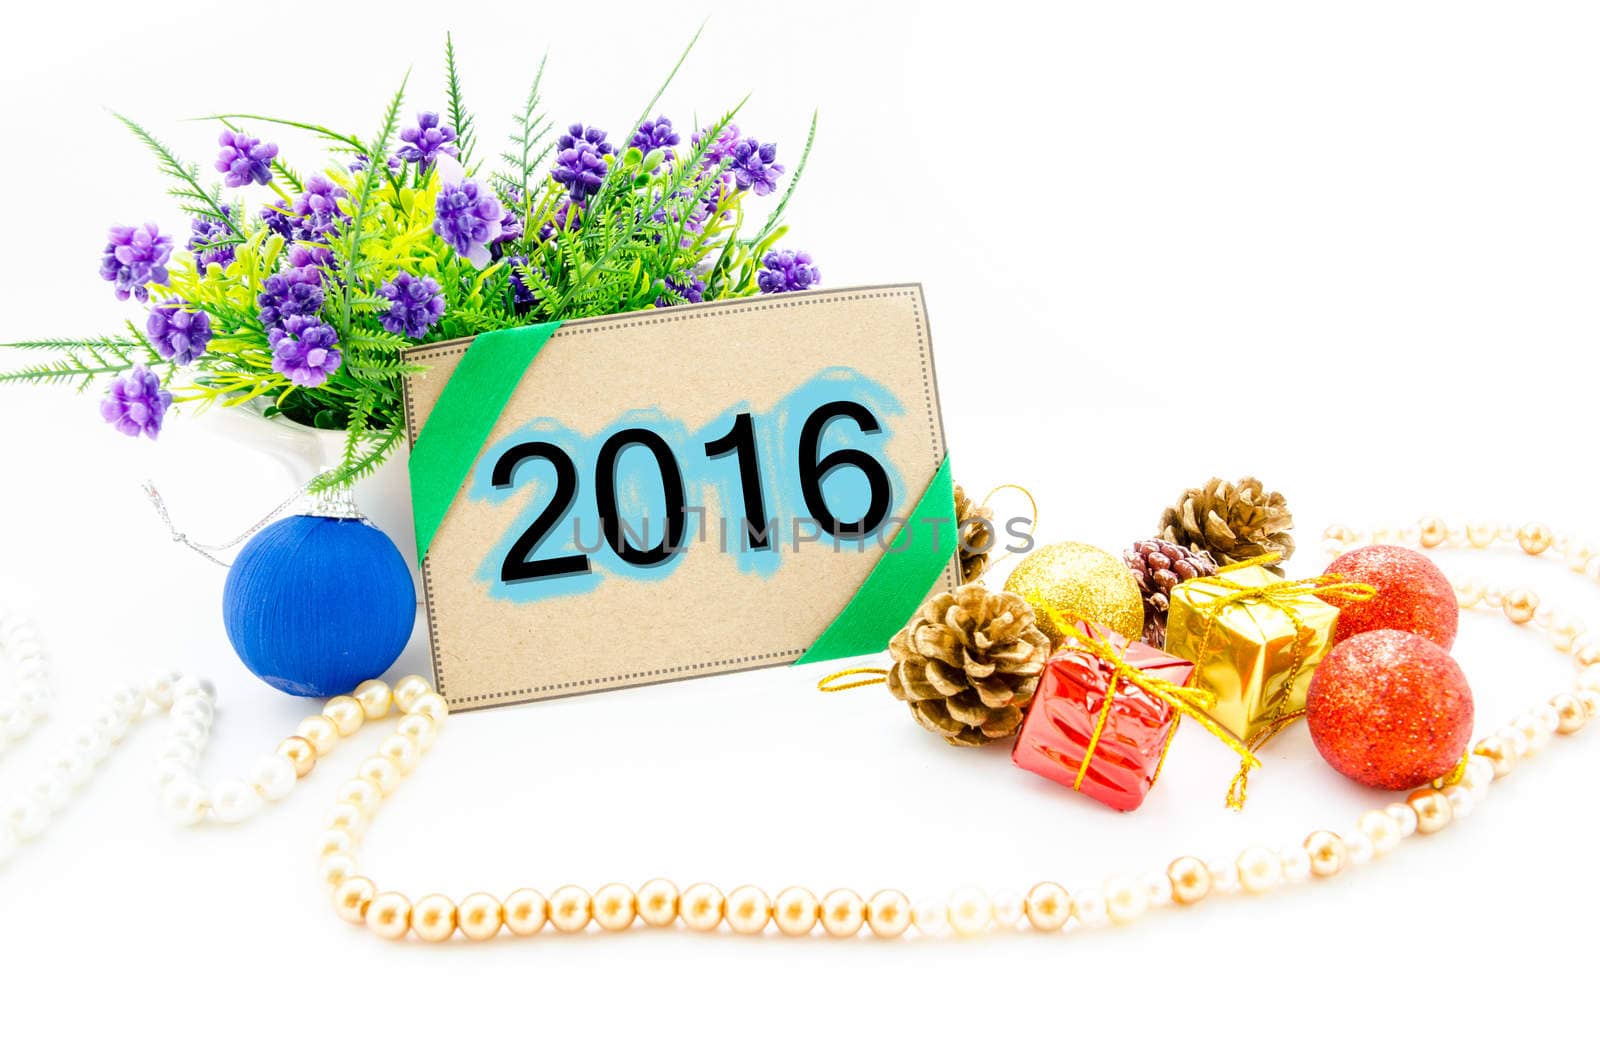 2016 on brown tag paper new year decoration